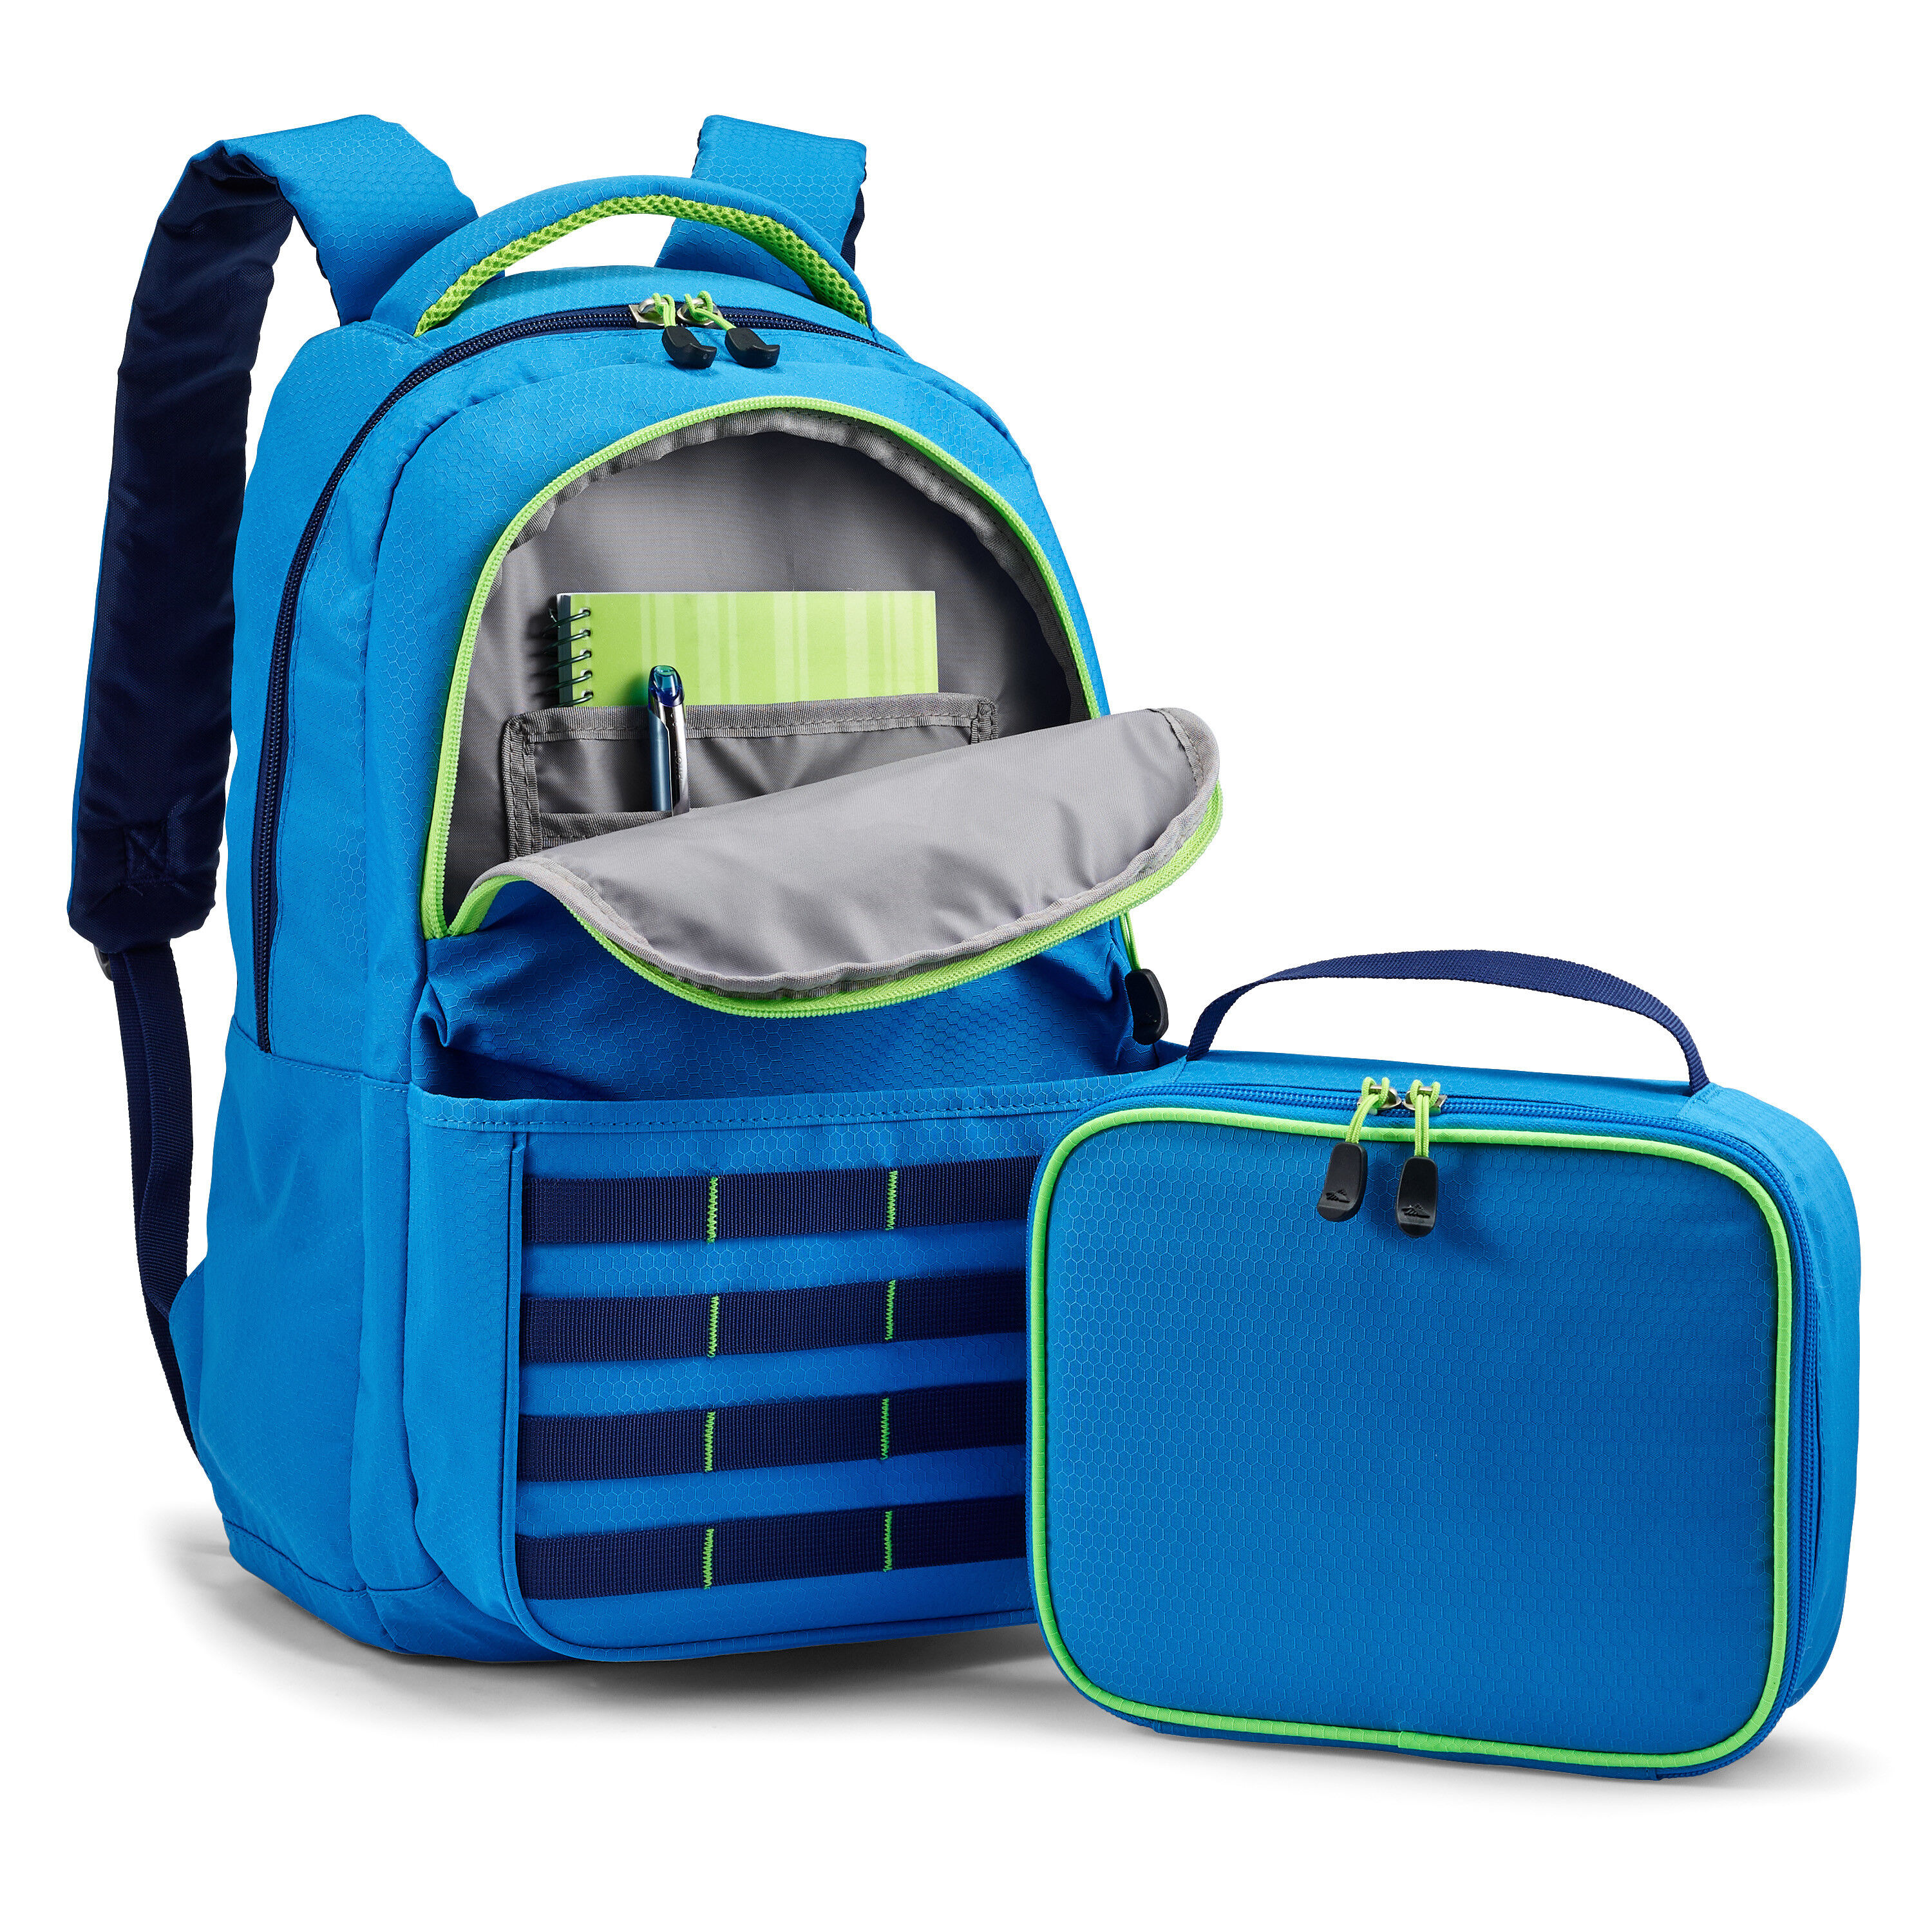 24 Wholesale Preassembled Girl's Printed Backpack And 20 Piece School  Supply Kit - at - wholesalesockdeals.com